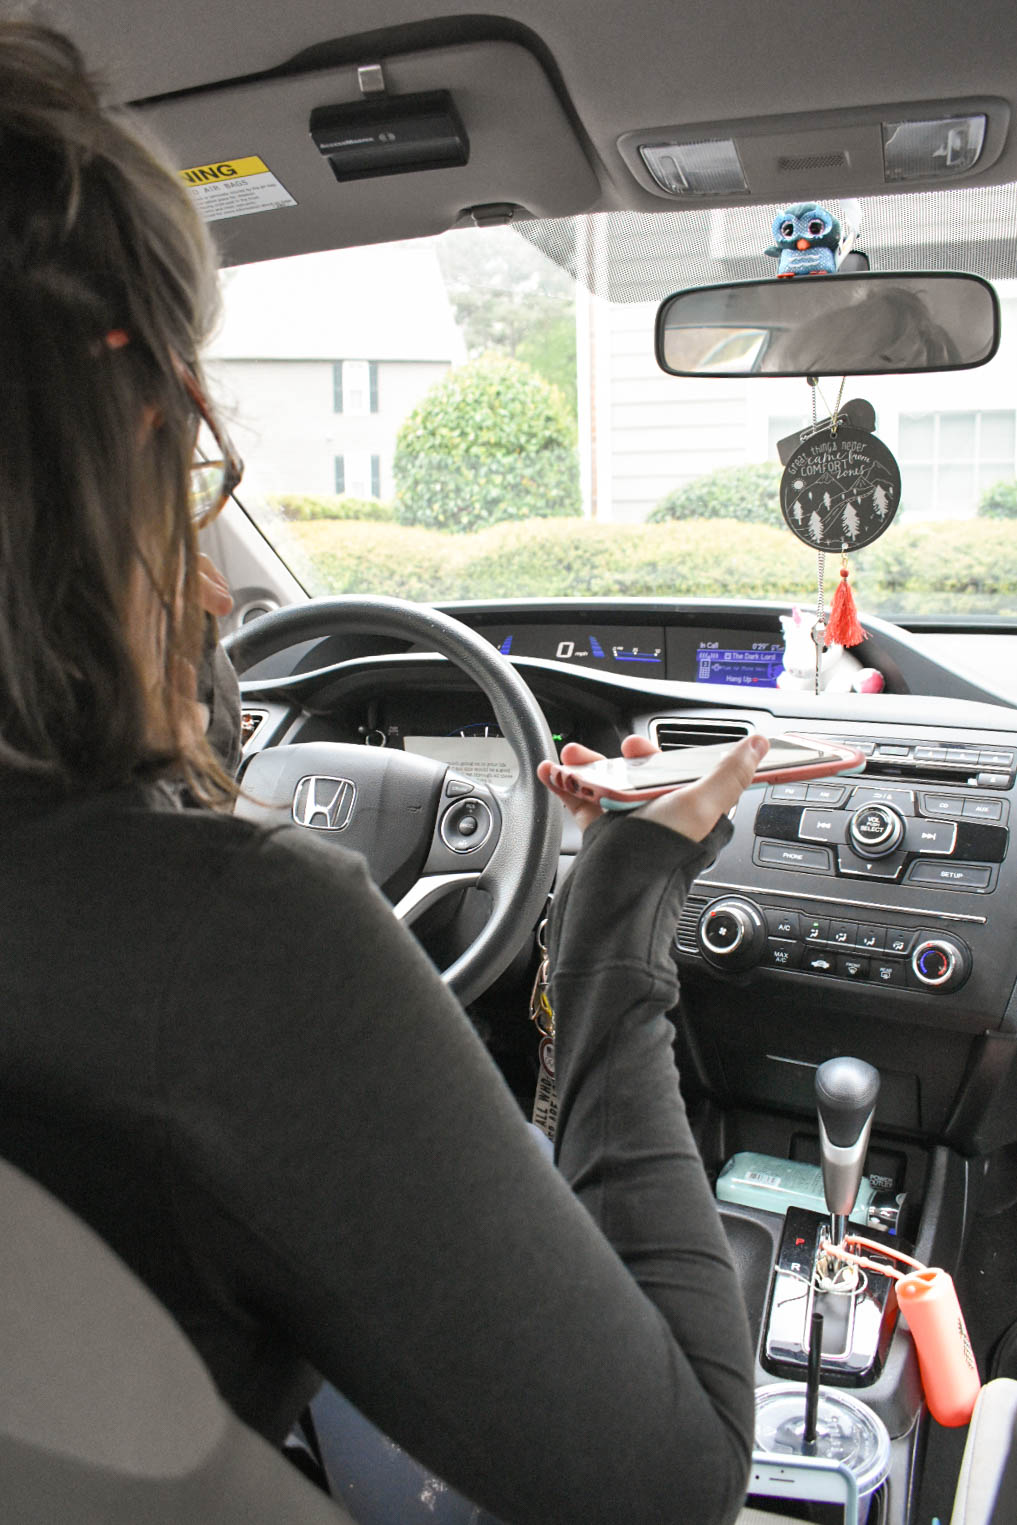 NSC brings awareness to distracted driving